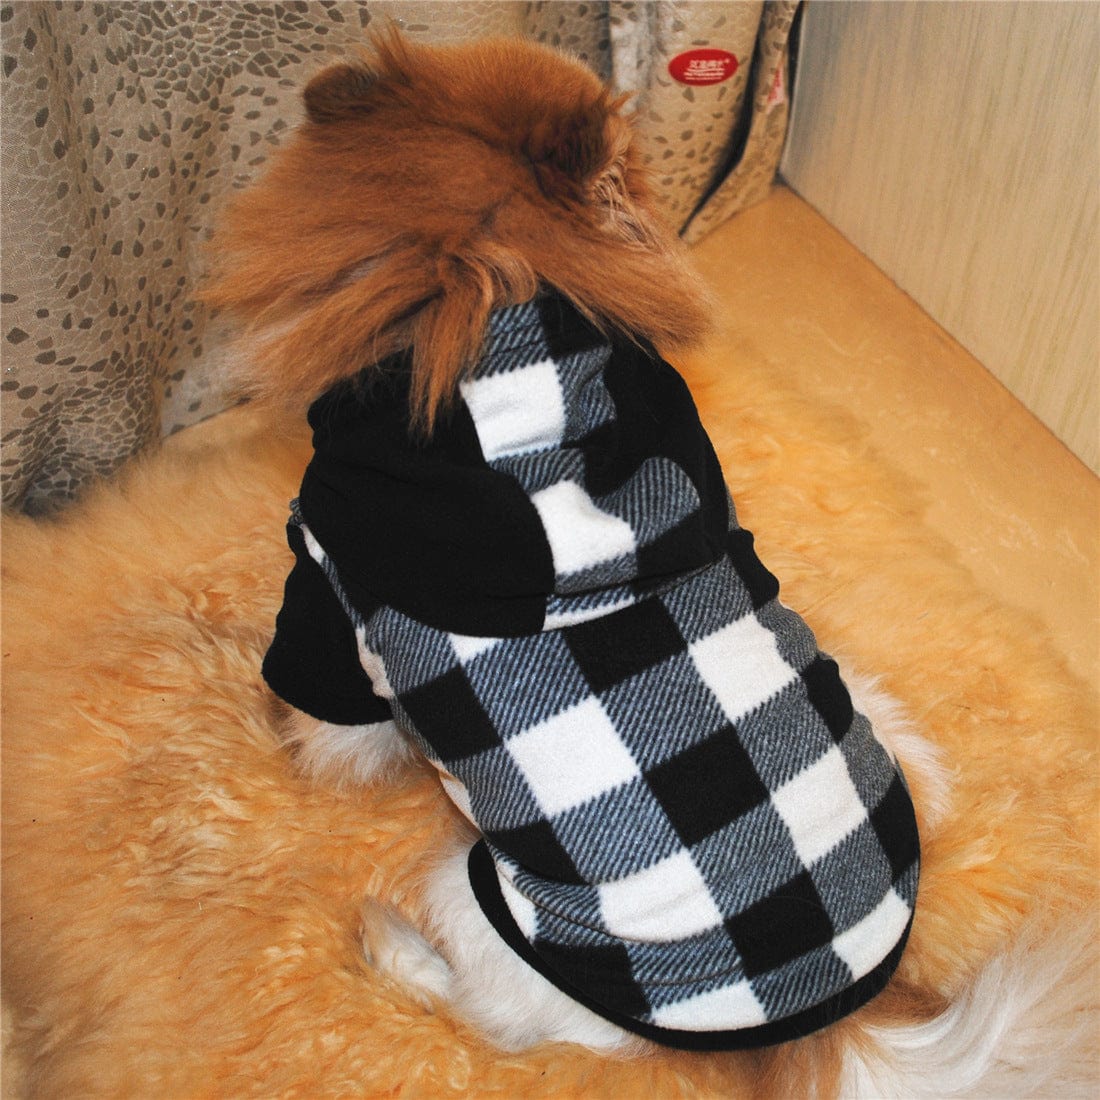 eszy2find pet clothing Pet Supplies Dog Winter Hooded Clothing Sweater